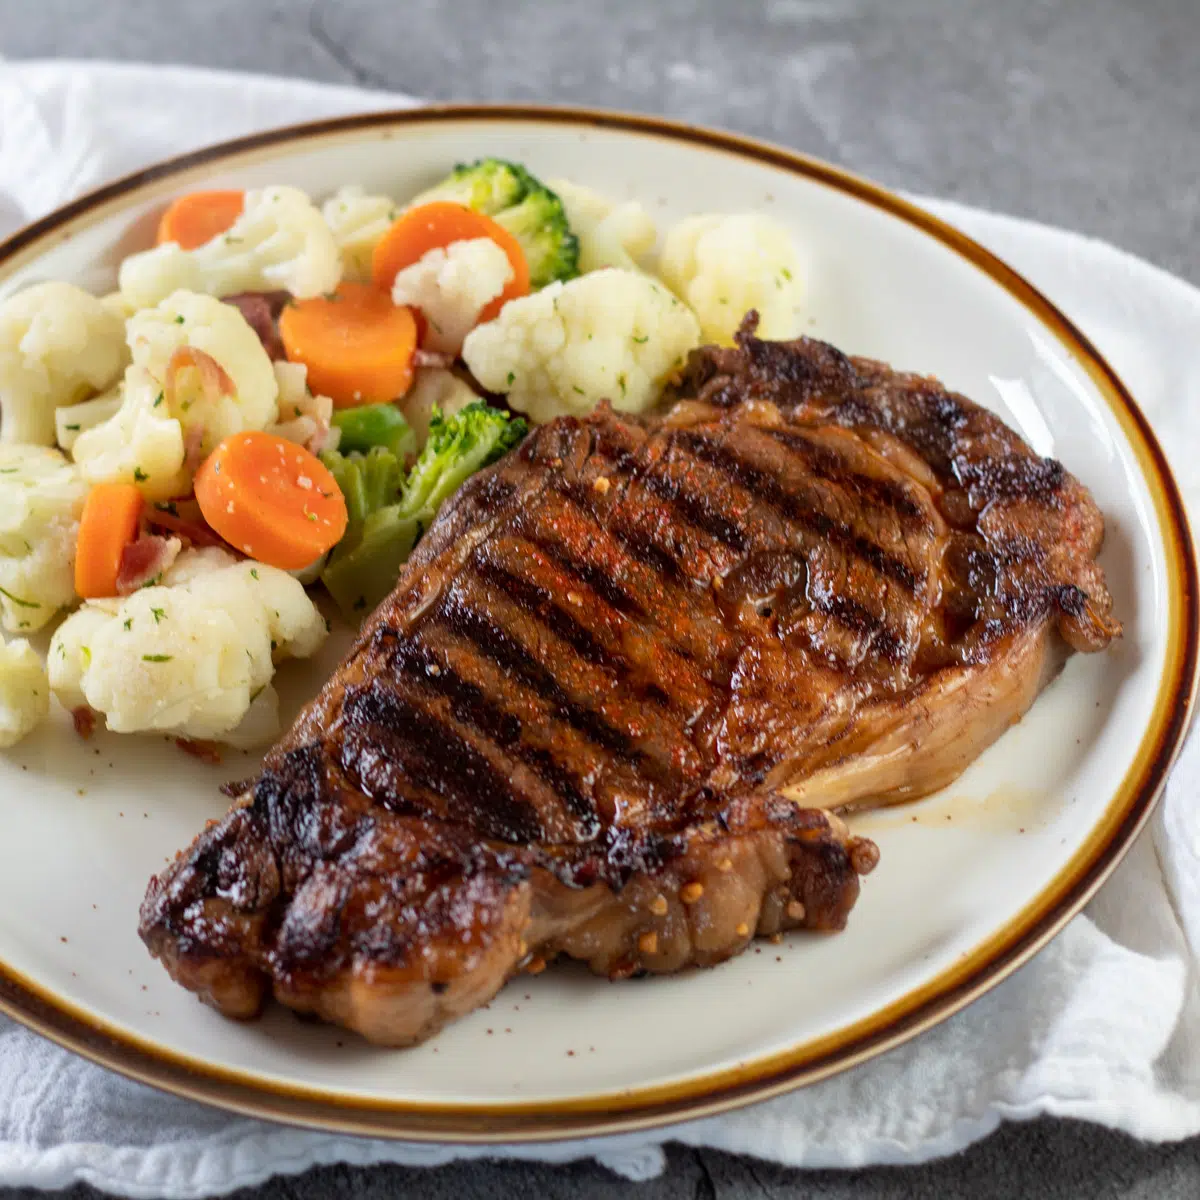 The best steak marinade recipe elevates your grilled steaks like this tender ribeye served with mixed veggies.